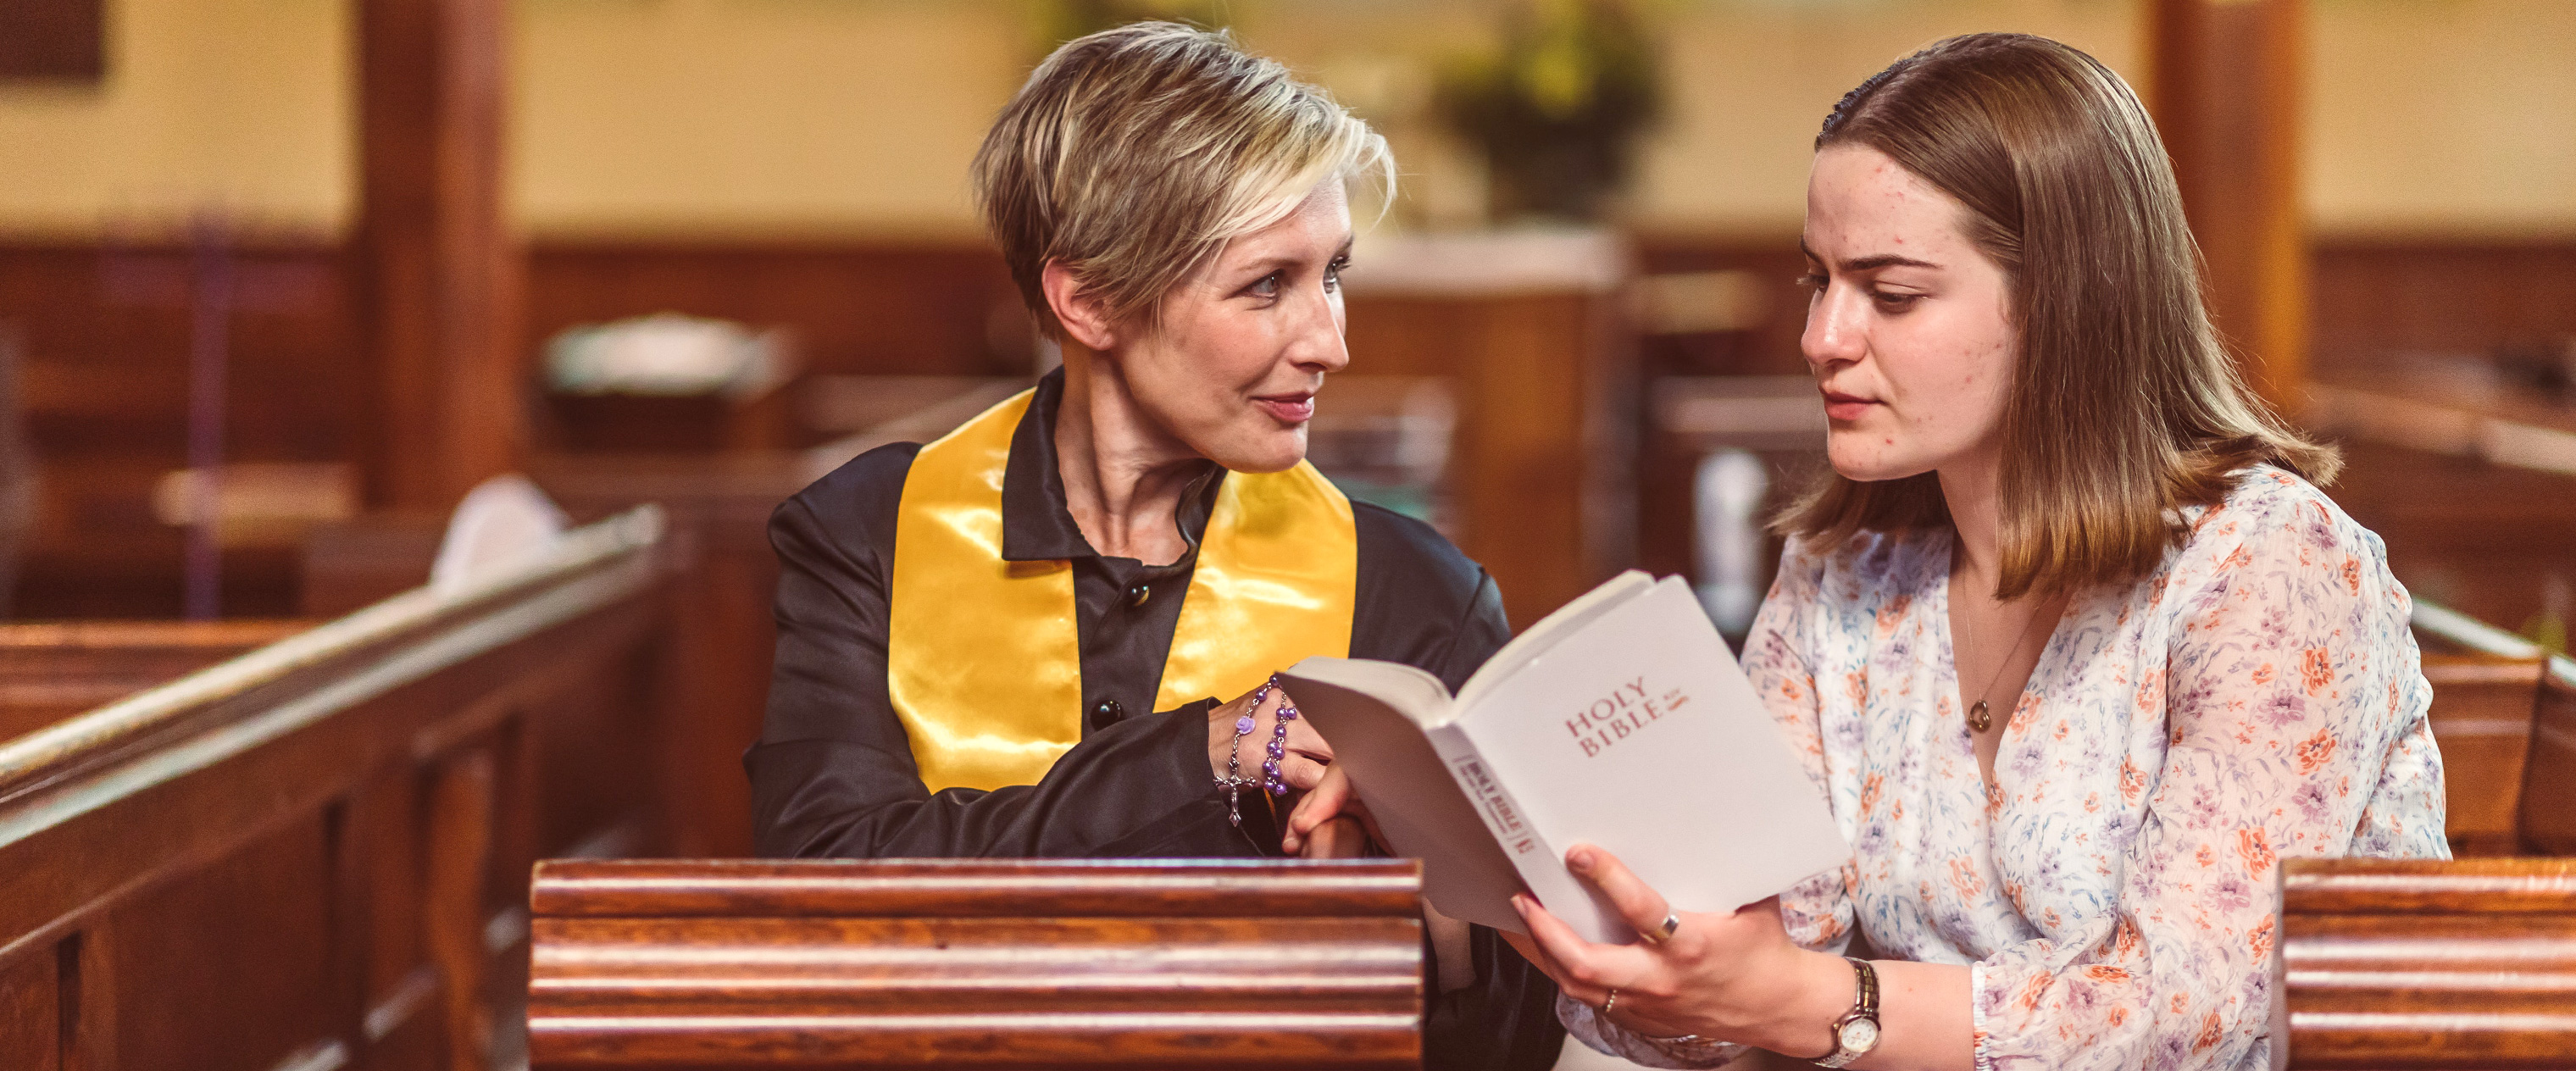 Woman priest speaking with a member of the congregation in church